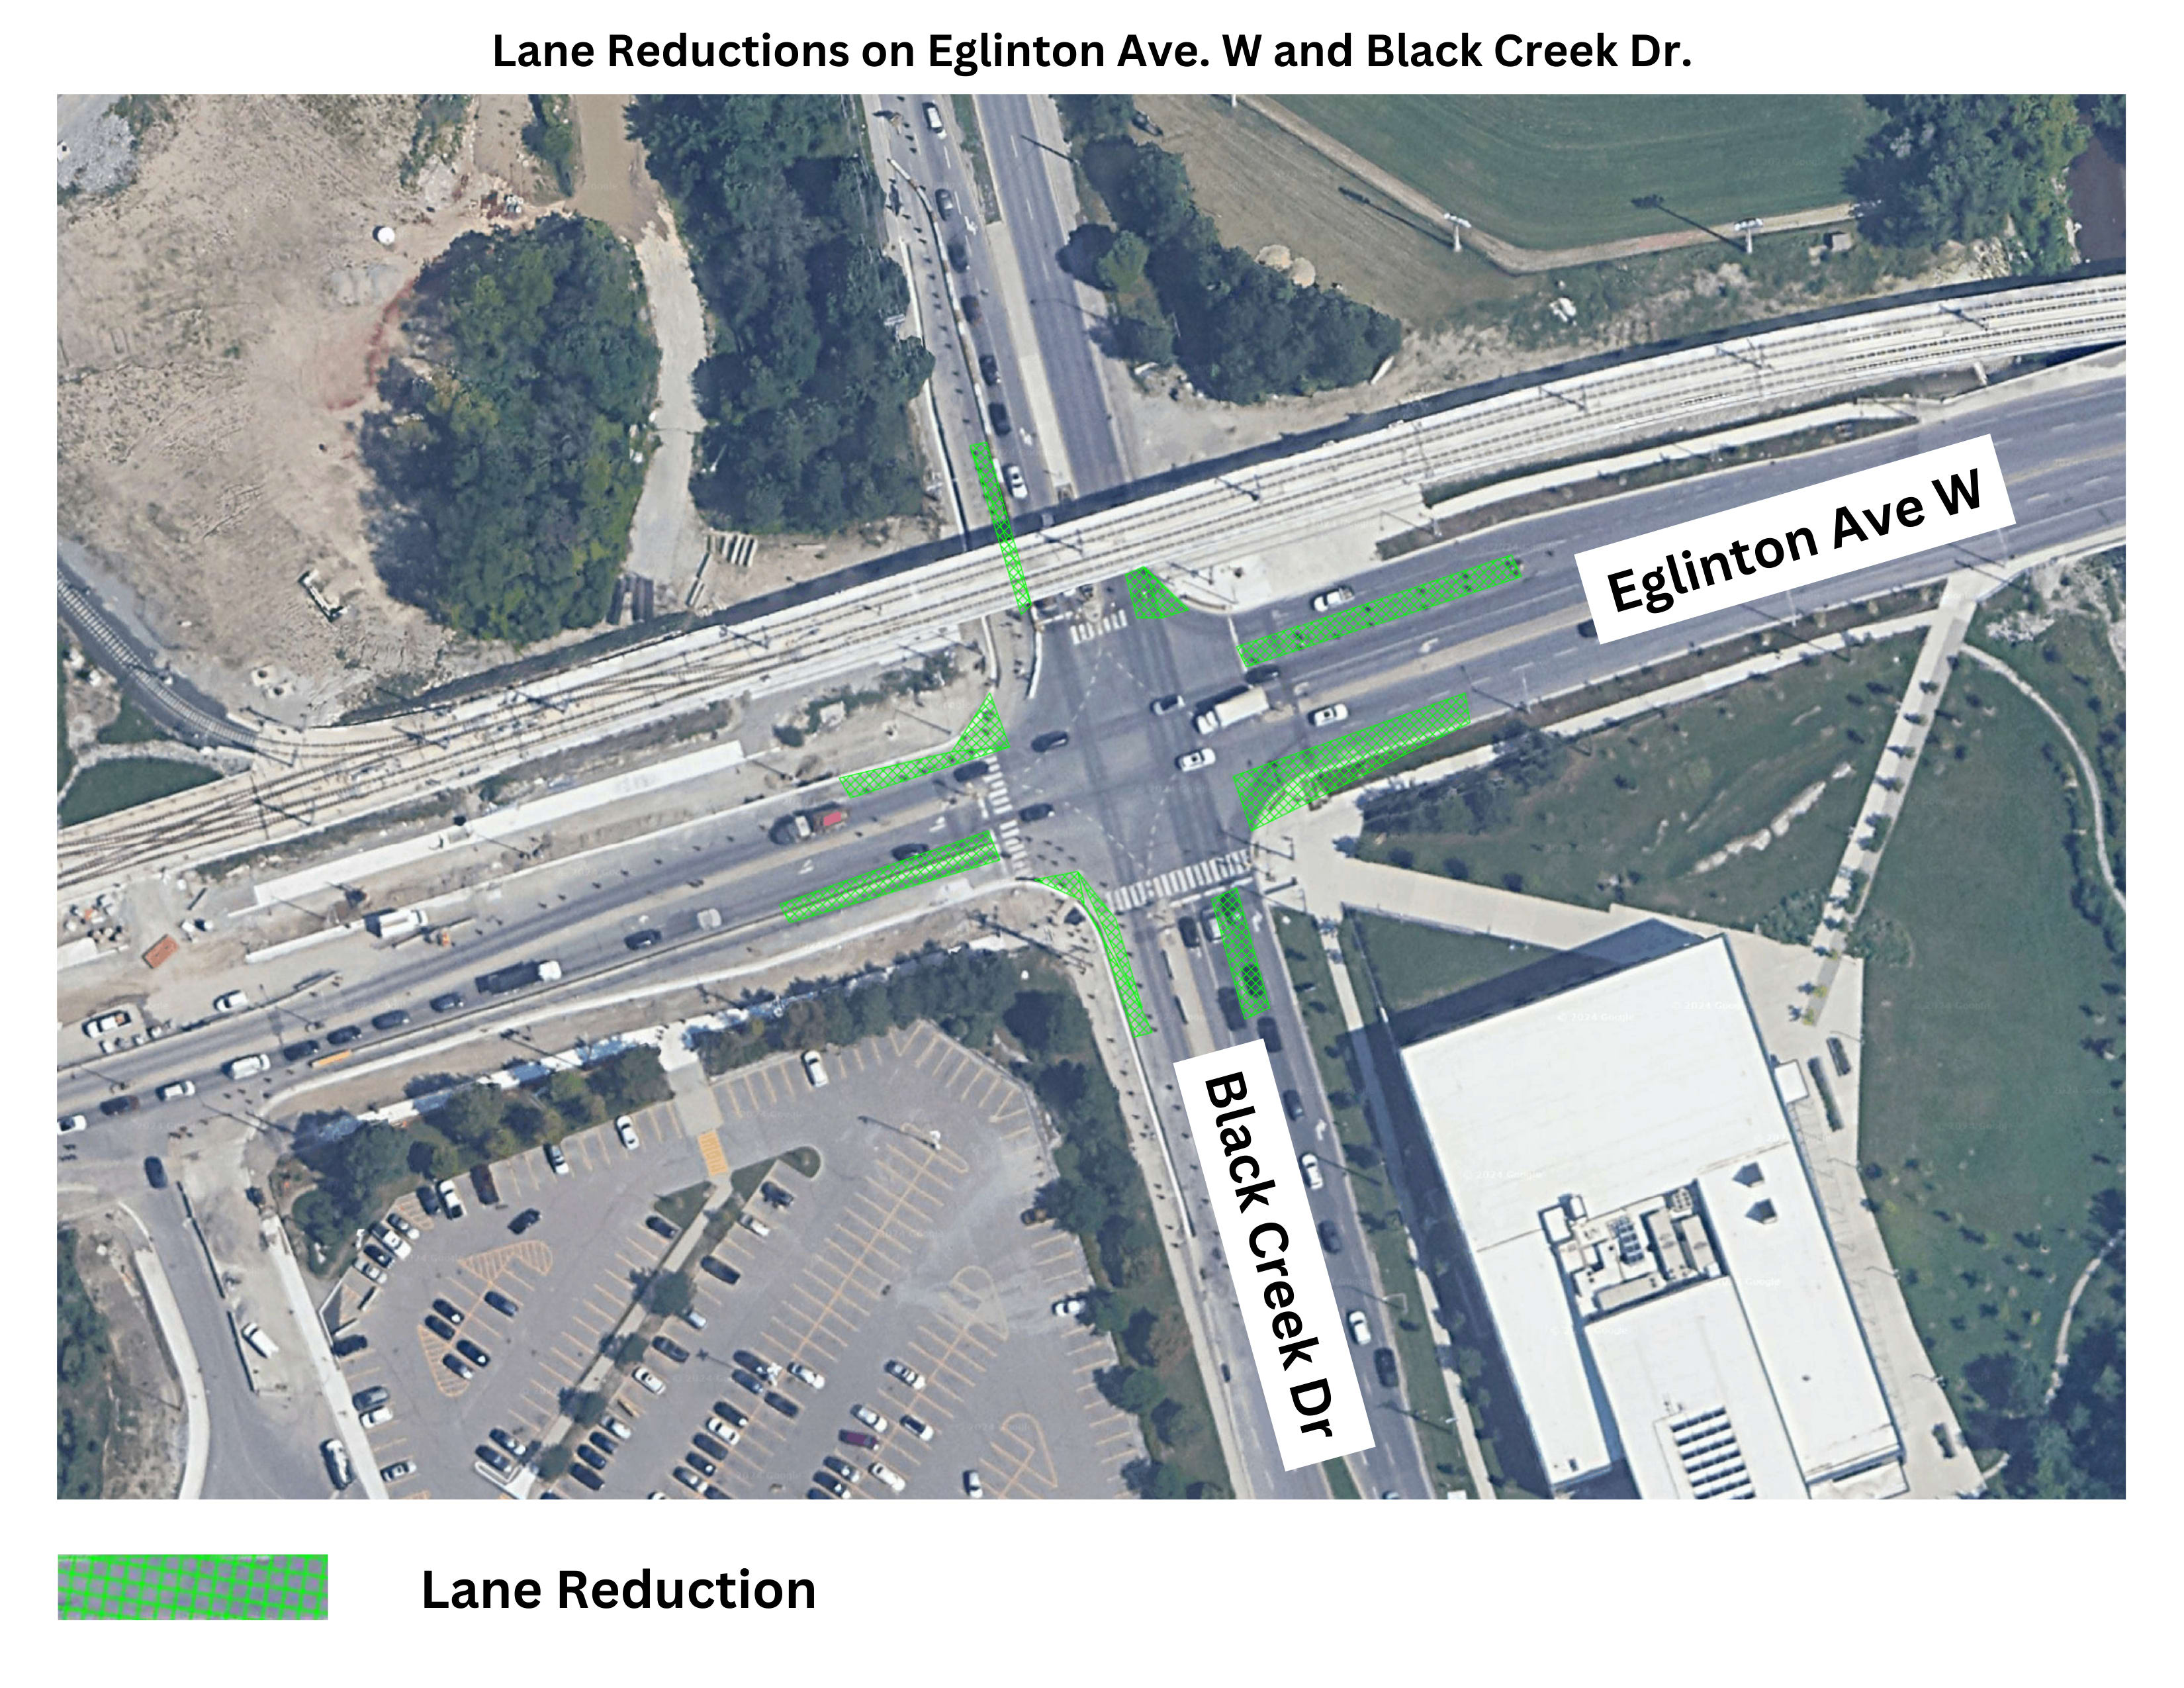 Lane Reductions on Eglinton Ave. W and Black Creek Dr